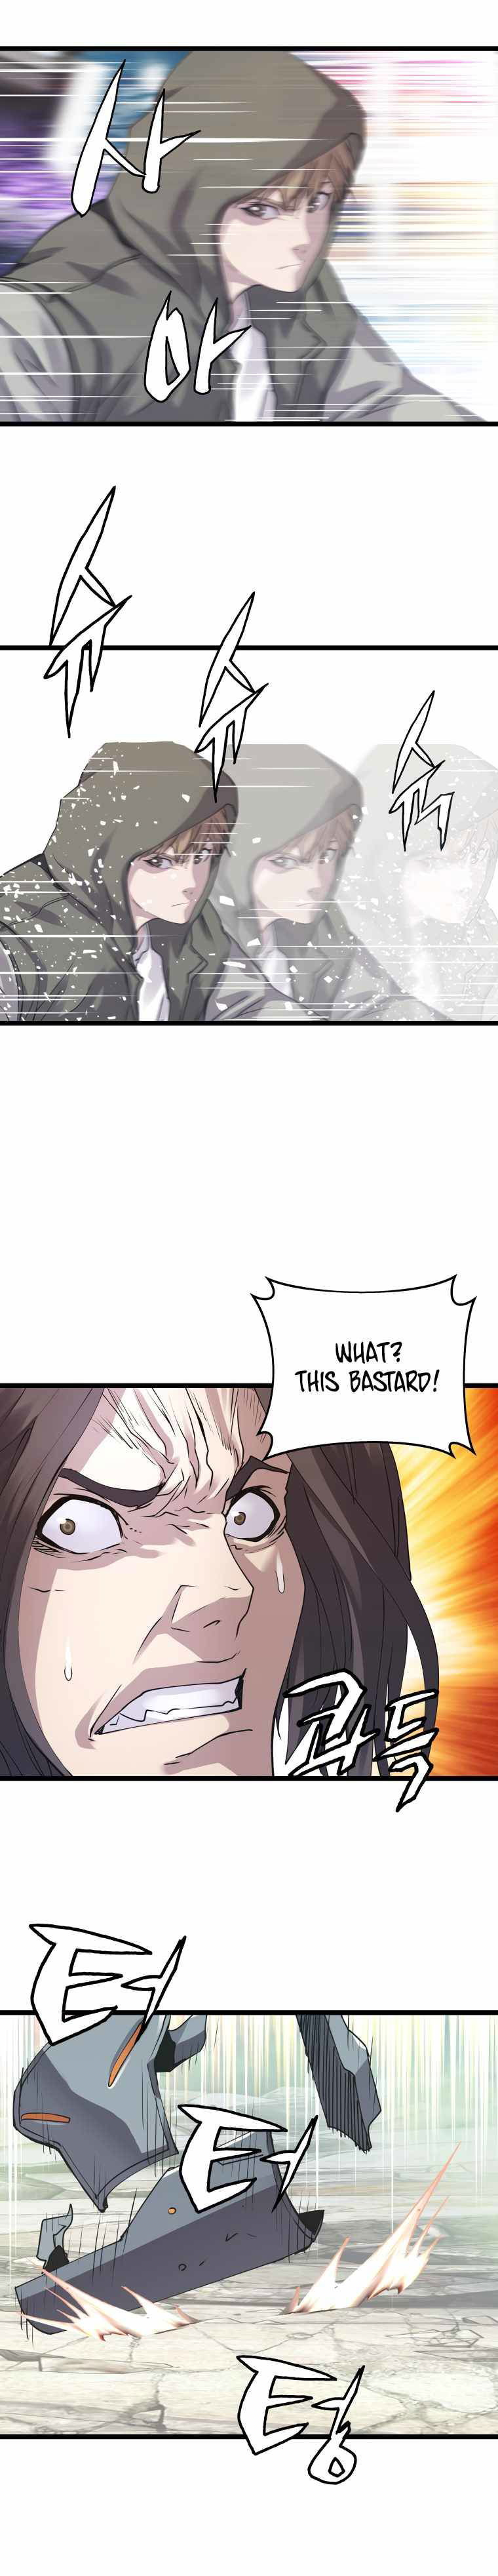 Undefeated Ranker Chapter 6 page 13